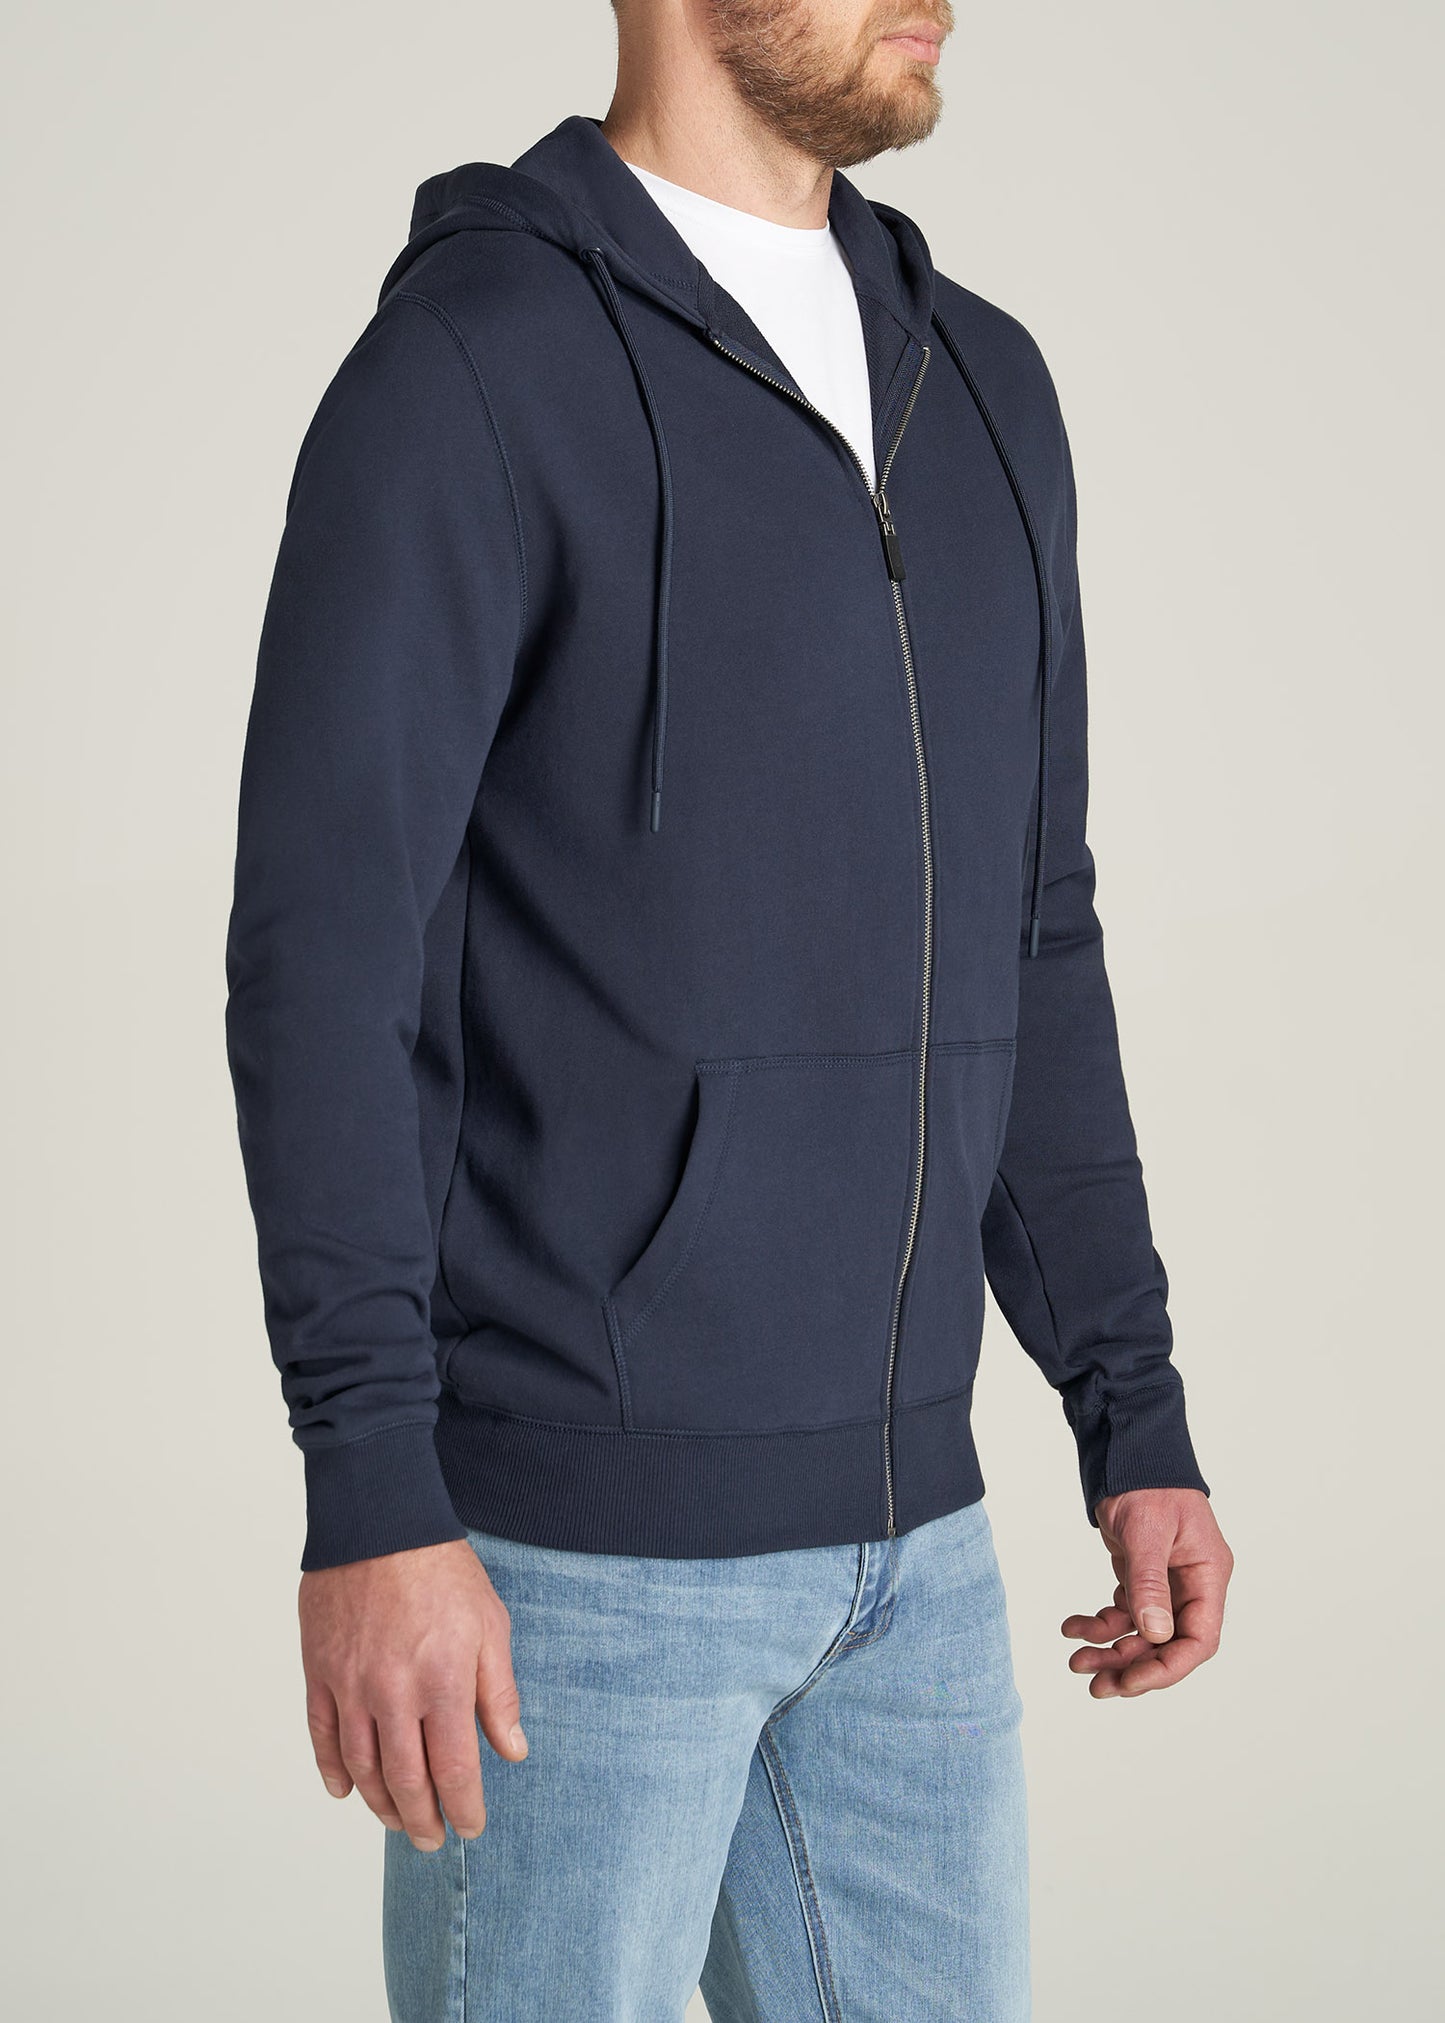    American-Tall-Men-8020-FrenchTerry-FullZip-Hoodie-Navy-side